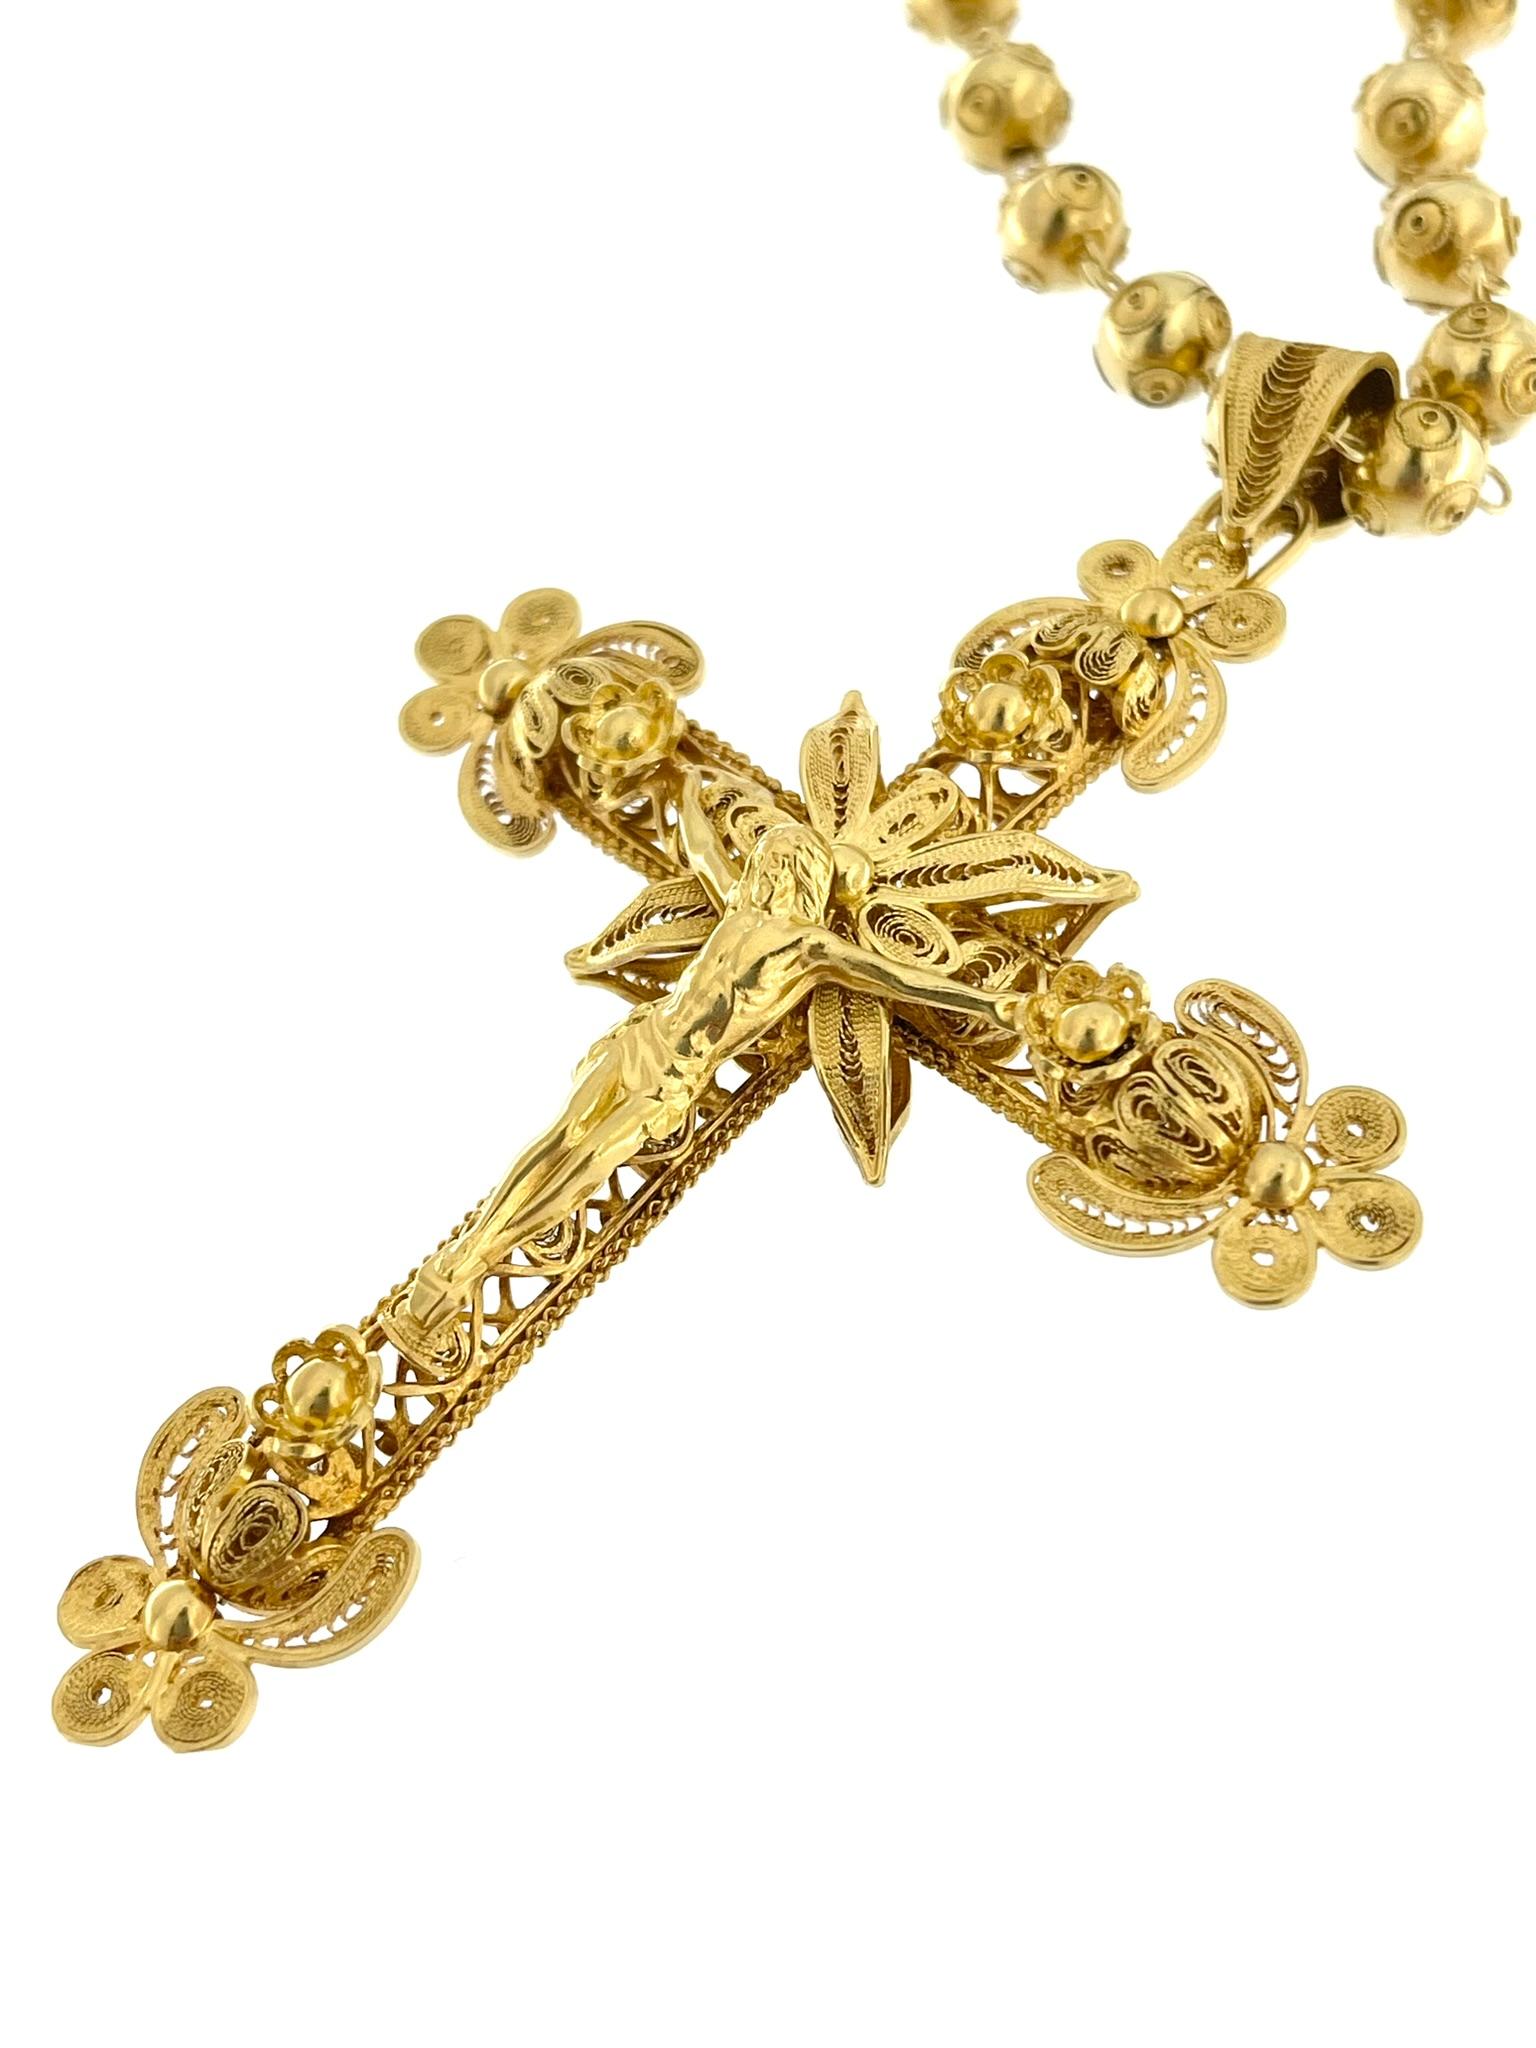 Traditional Hand-Made Portuguese Crucifix with Chain 19 karat Yellow Gold For Sale 5